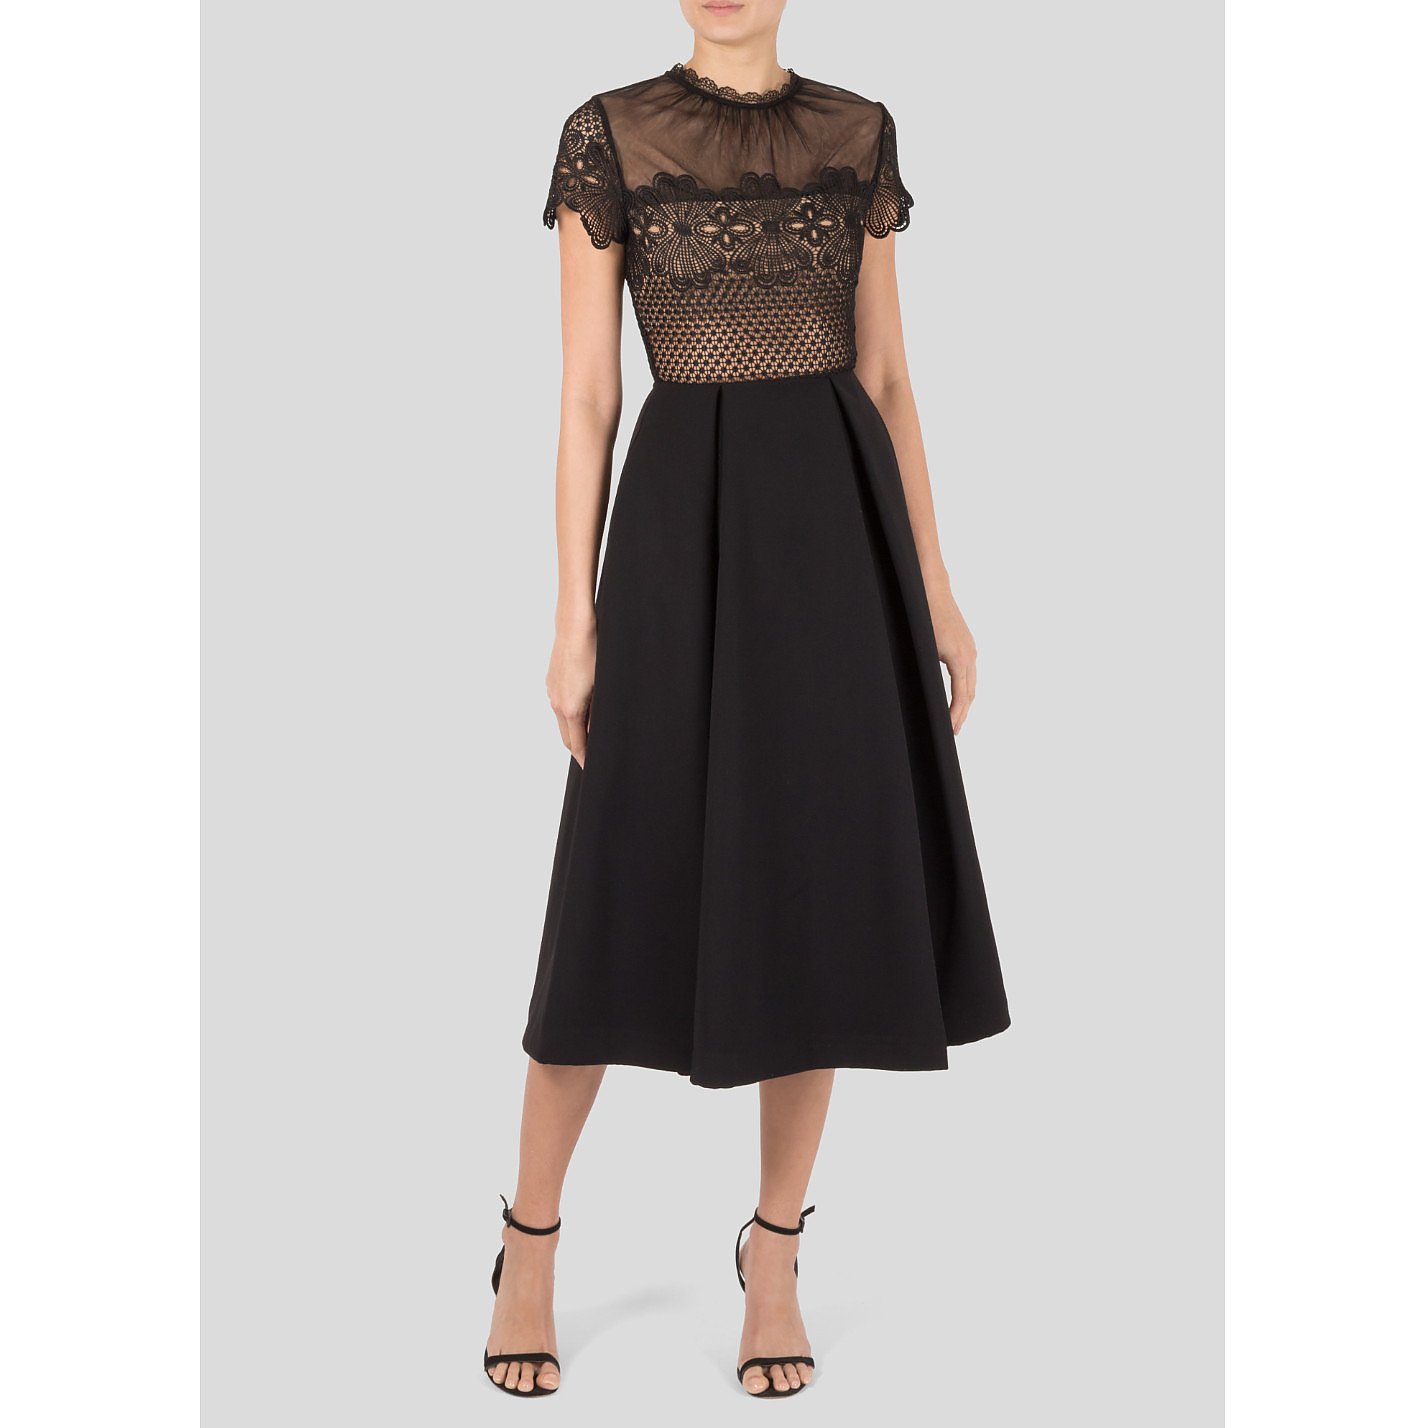 Rent or Buy SelfPortrait Felicia Embroidered Lace Midi